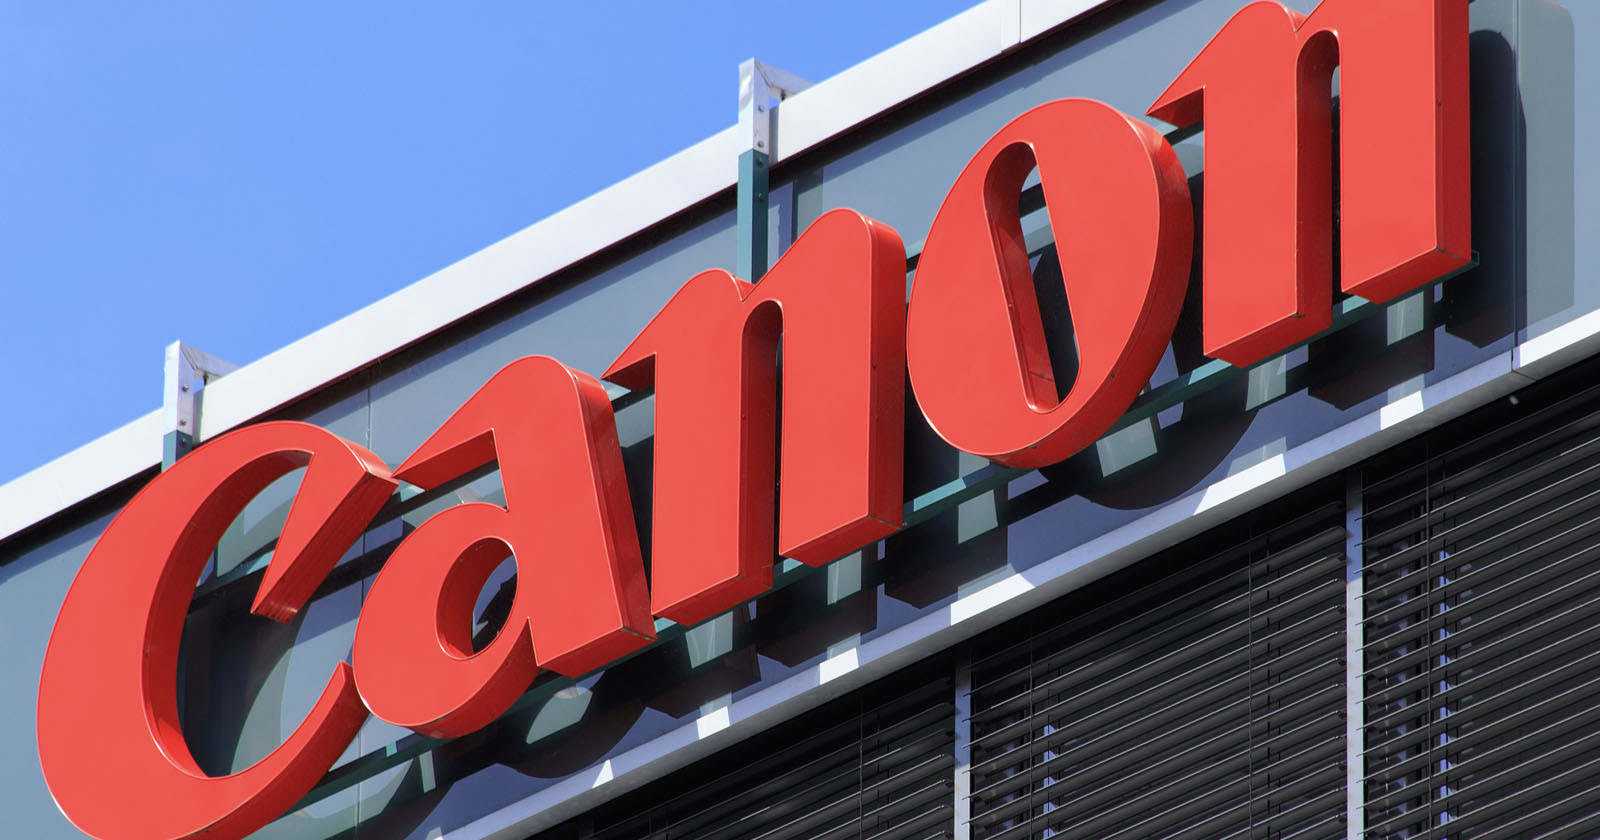  viltrox says canon has demanded they stop selling 